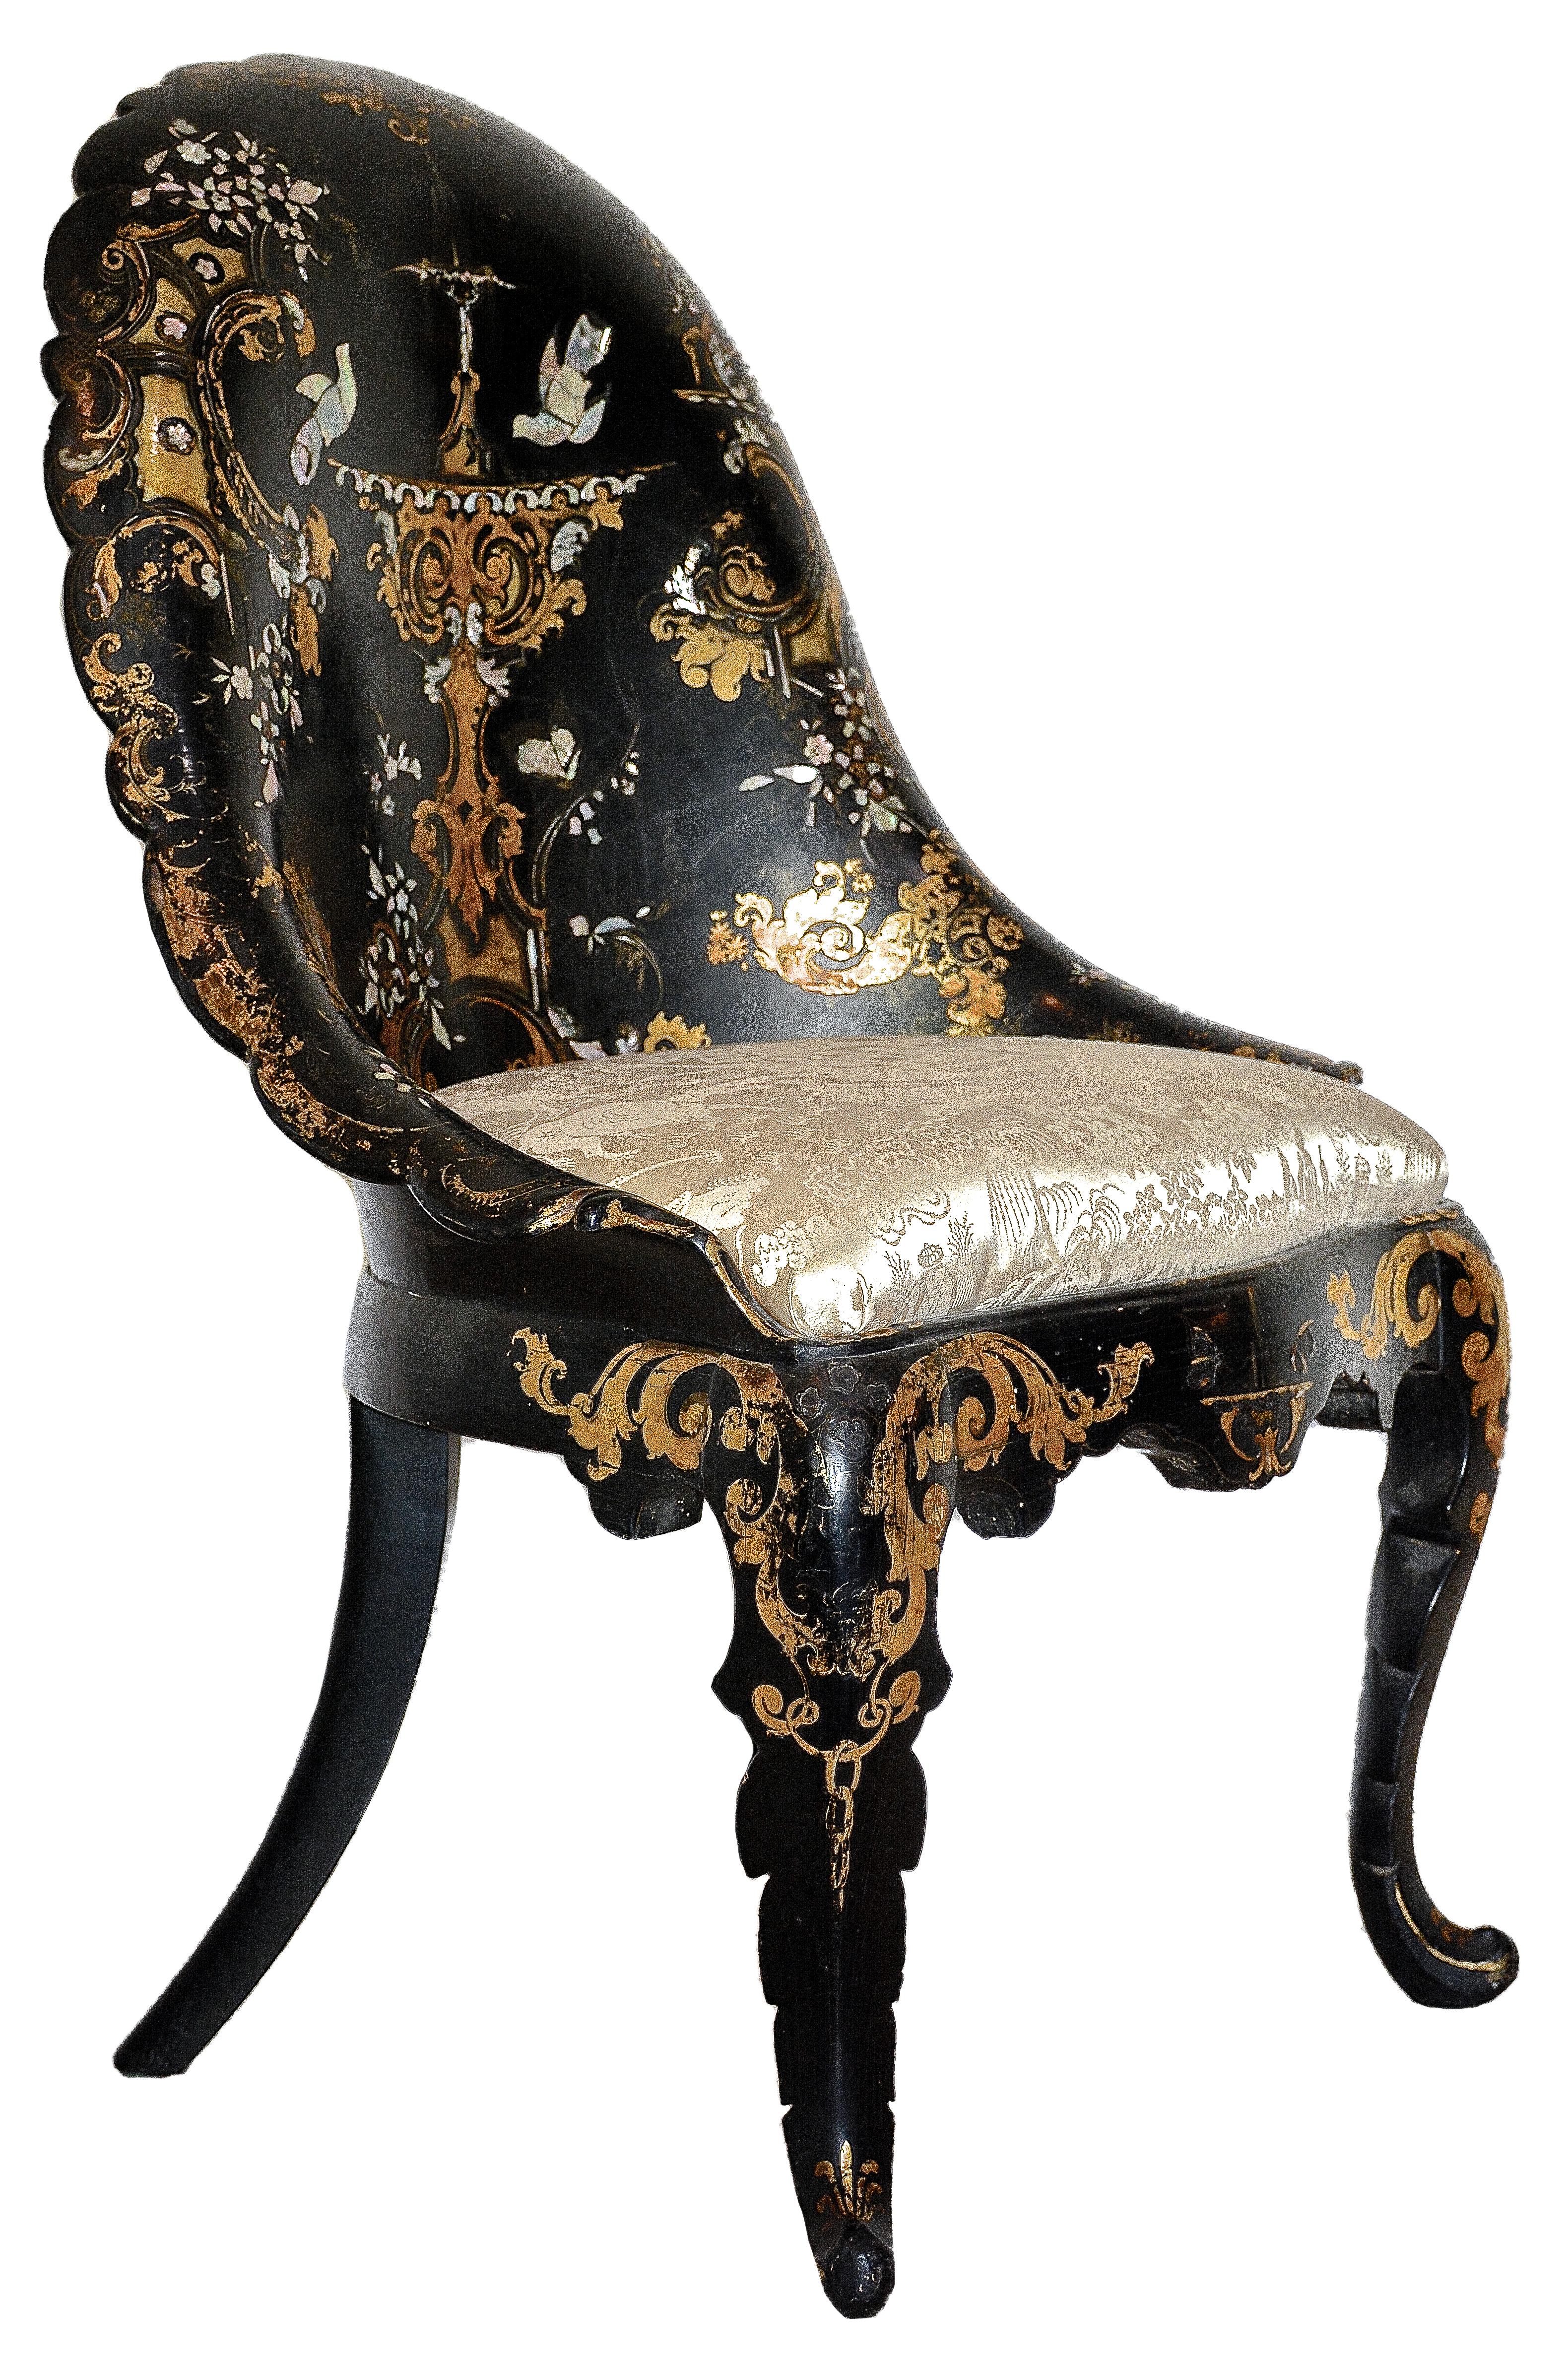 English 19th Century Victorian Inlaid Mother-of-Pearl & Gold Leaf Papier Mache Chair For Sale